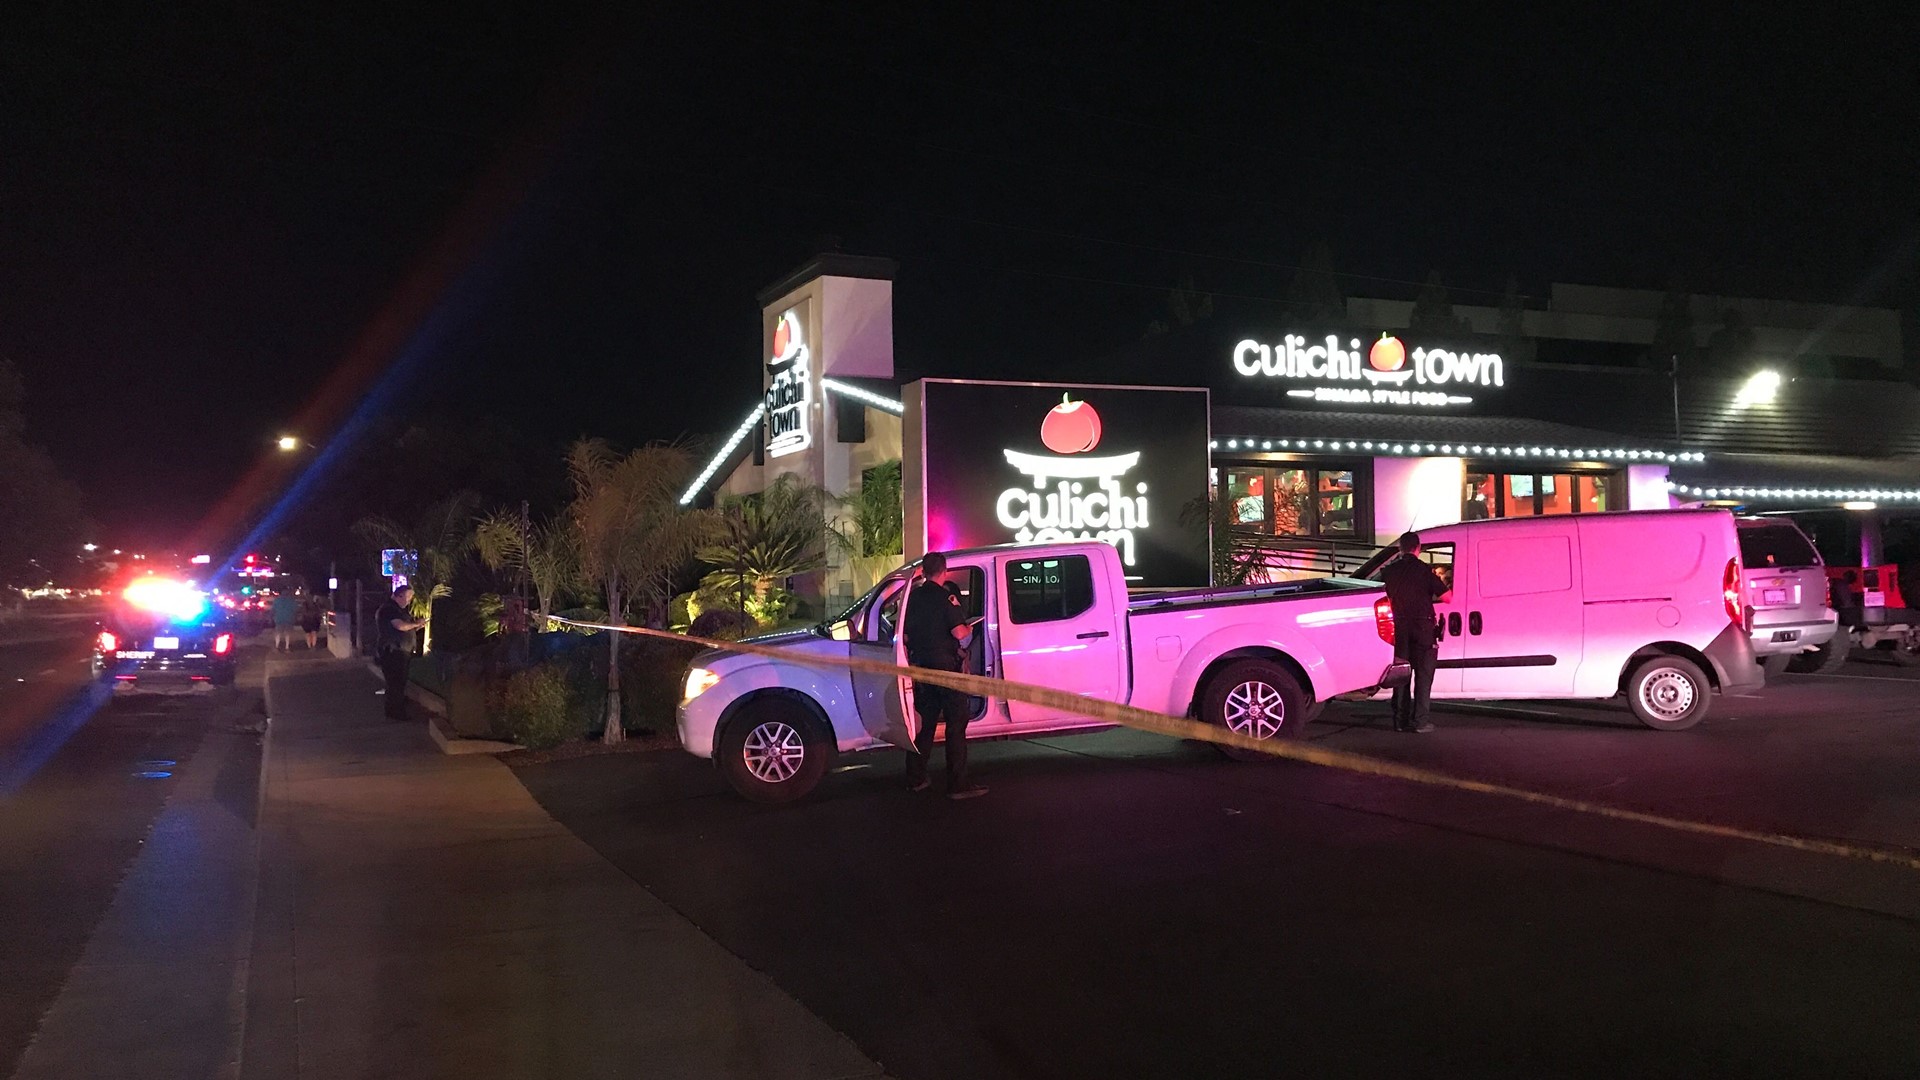 Deputies were called to the scene of a shooting outside of a restaurant in Arden-Arcade, Sunday night. According to the Sacramento County Sheriff’s Office, two people were shot. The shooter is still at large.